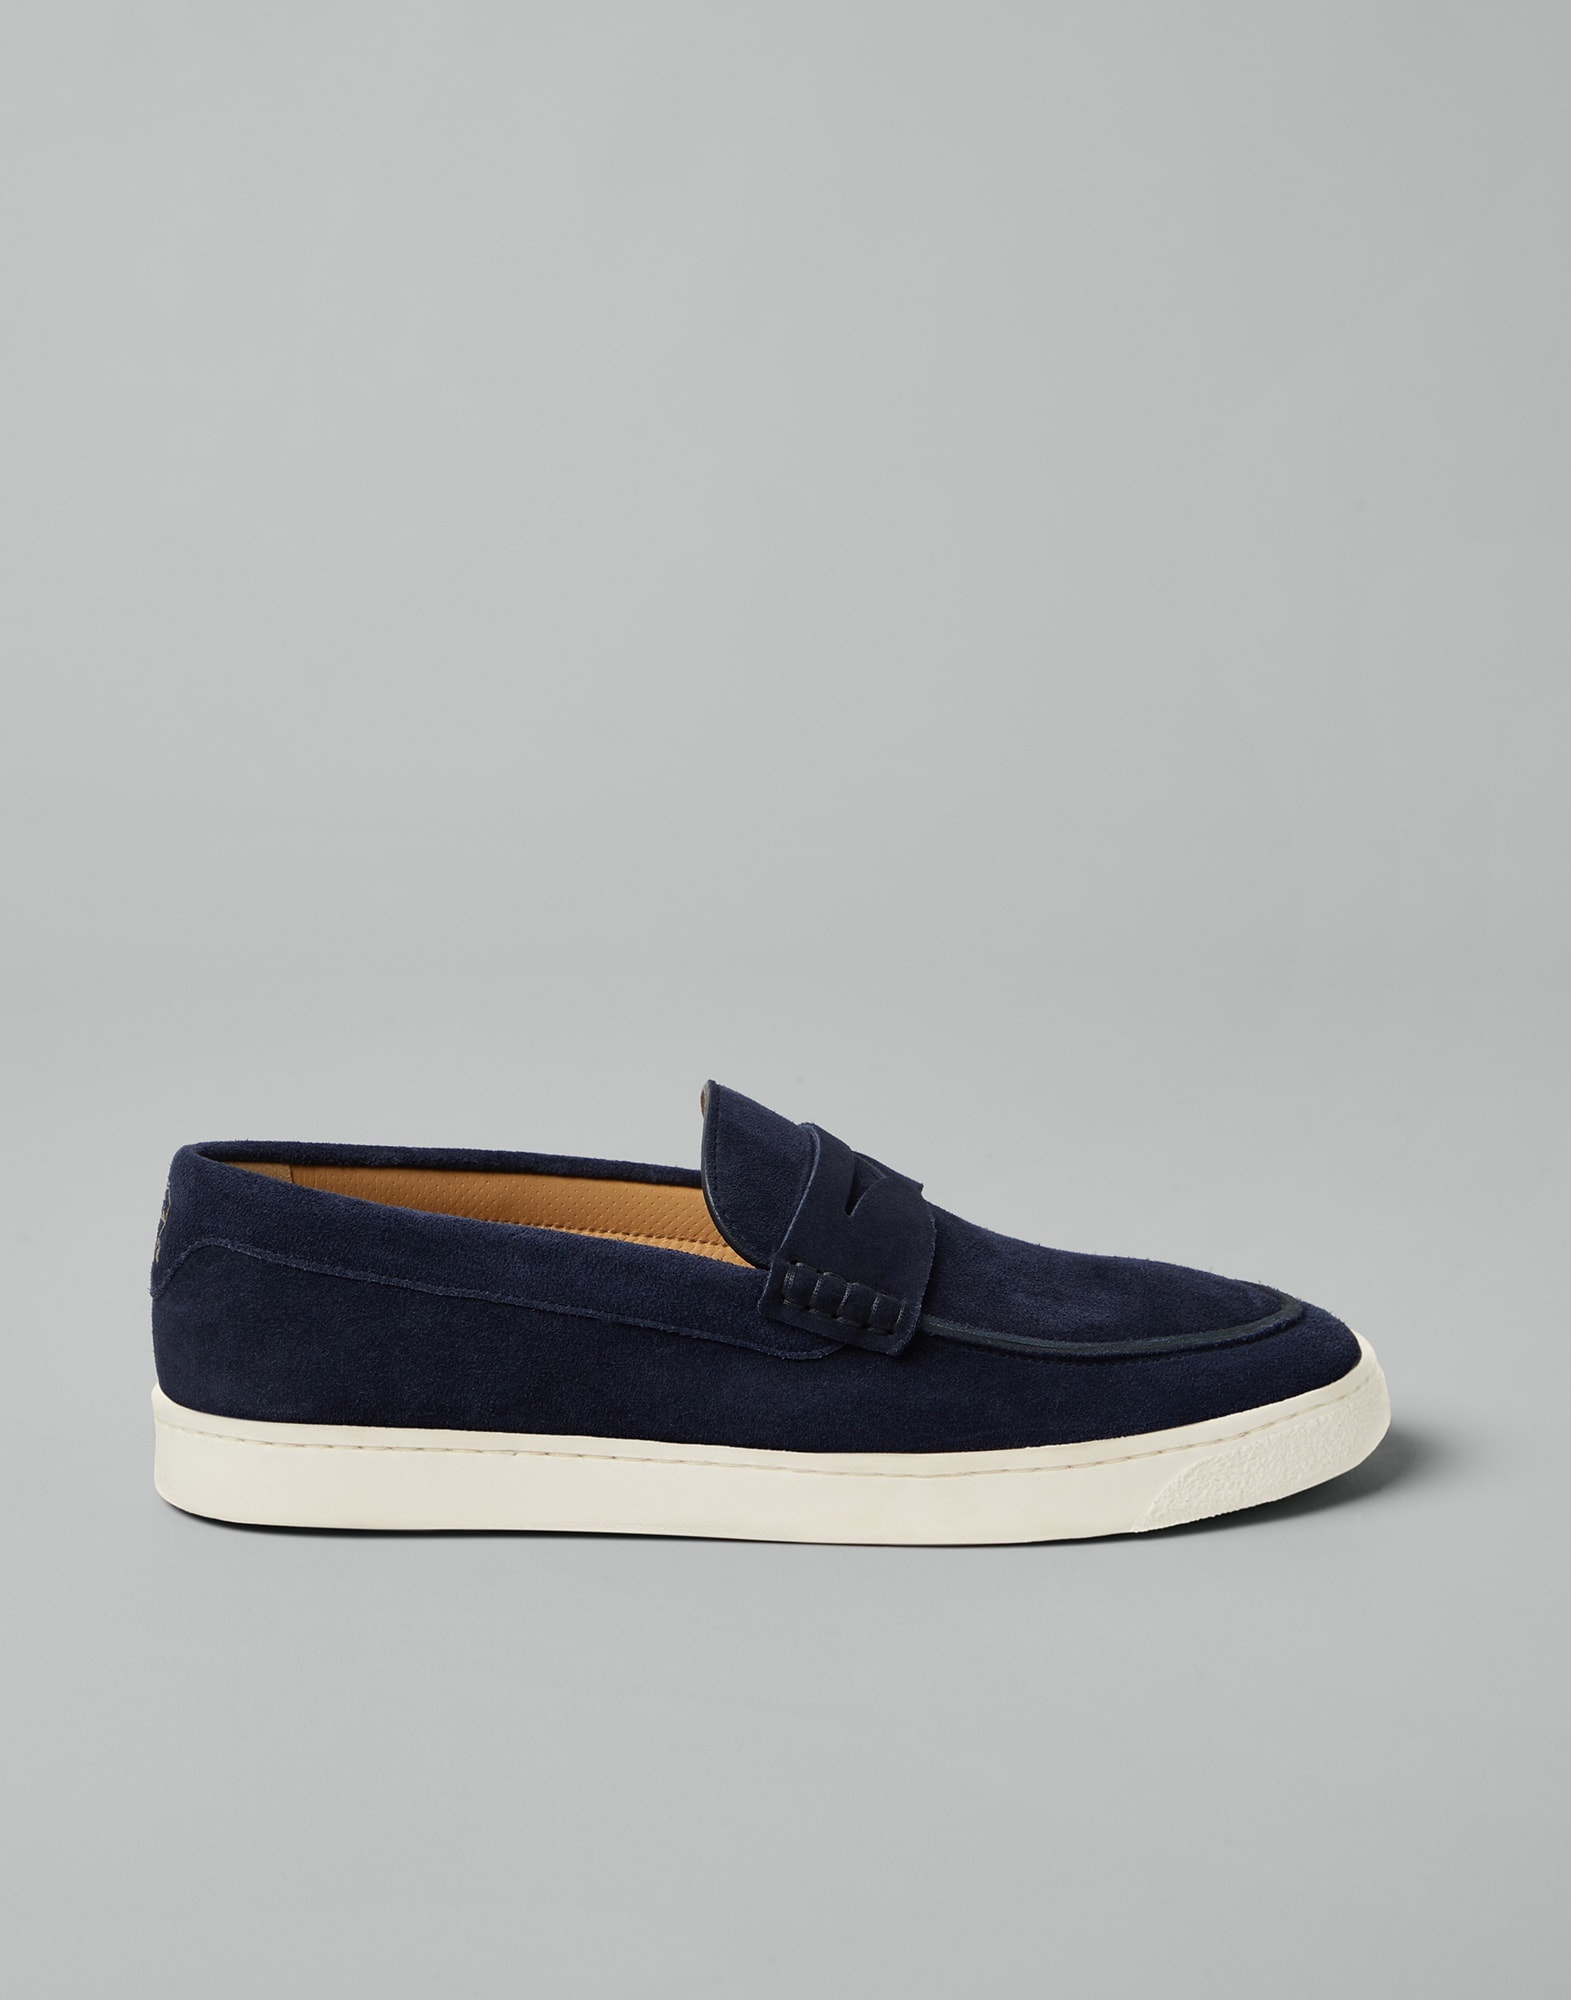 Suede loafer sneakers with natural rubber sole - 5